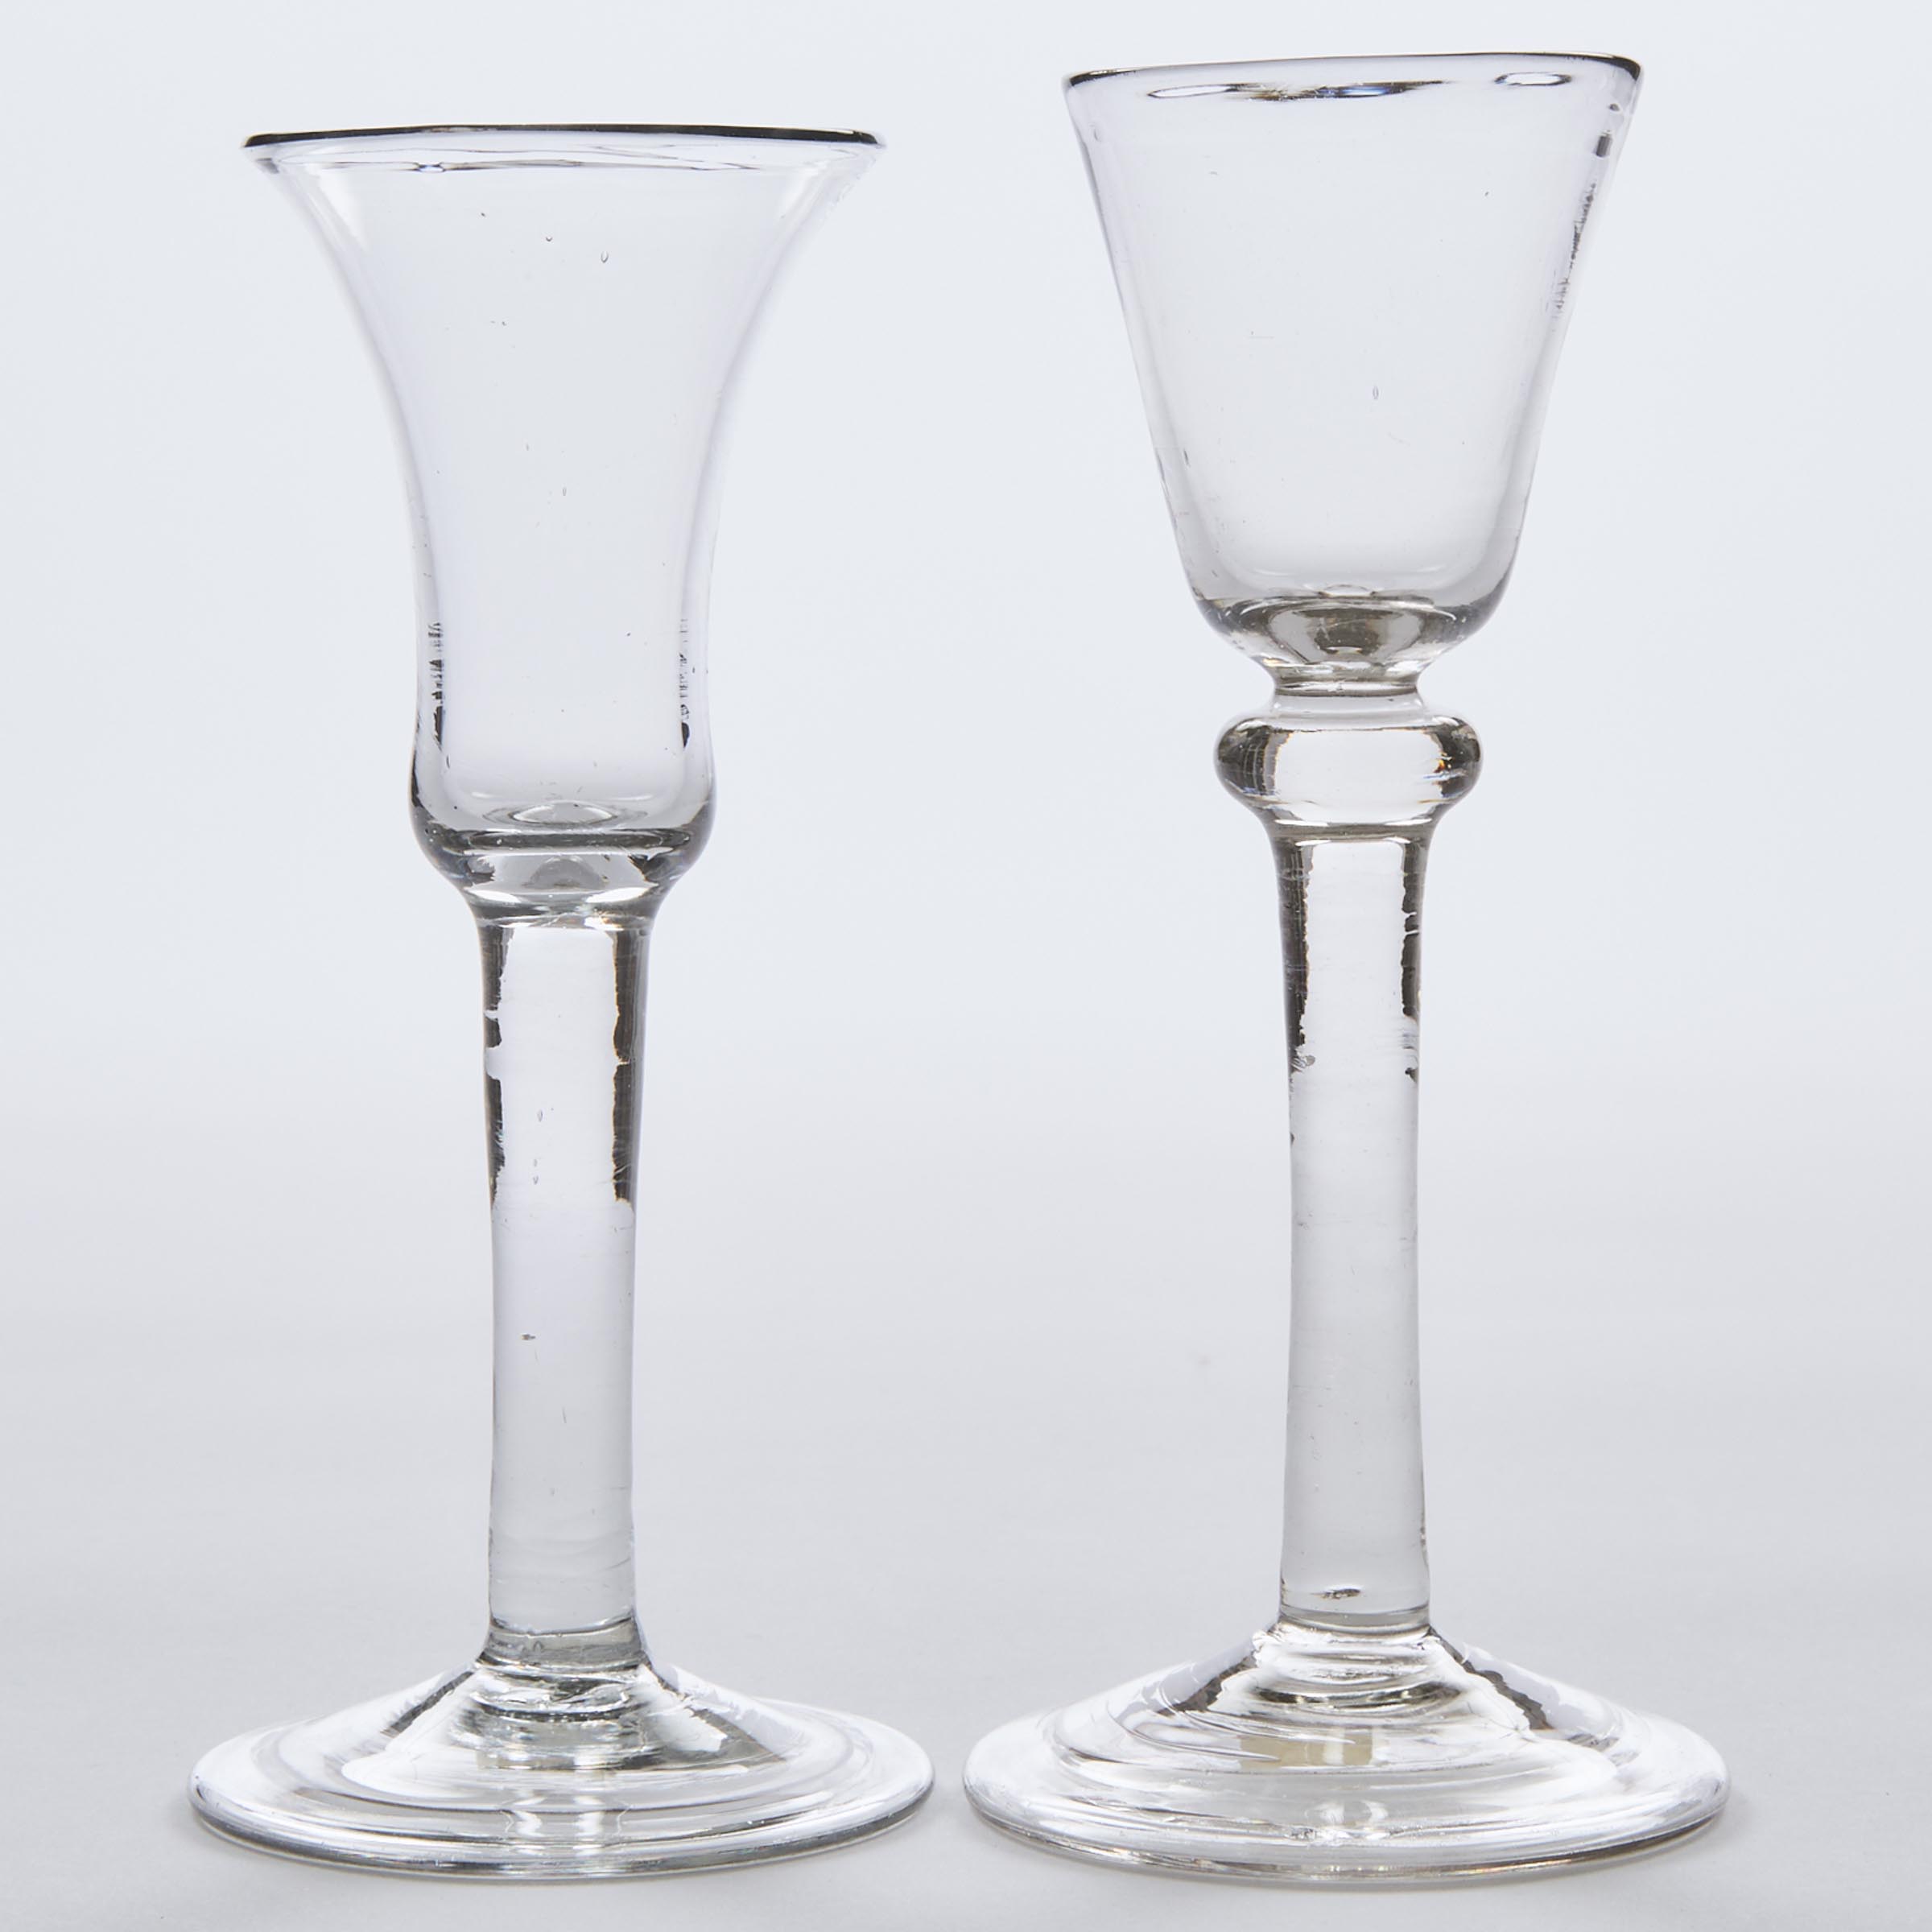 Two English Balustroid or Plain Stemmed Wine Glasses, mid-18th century